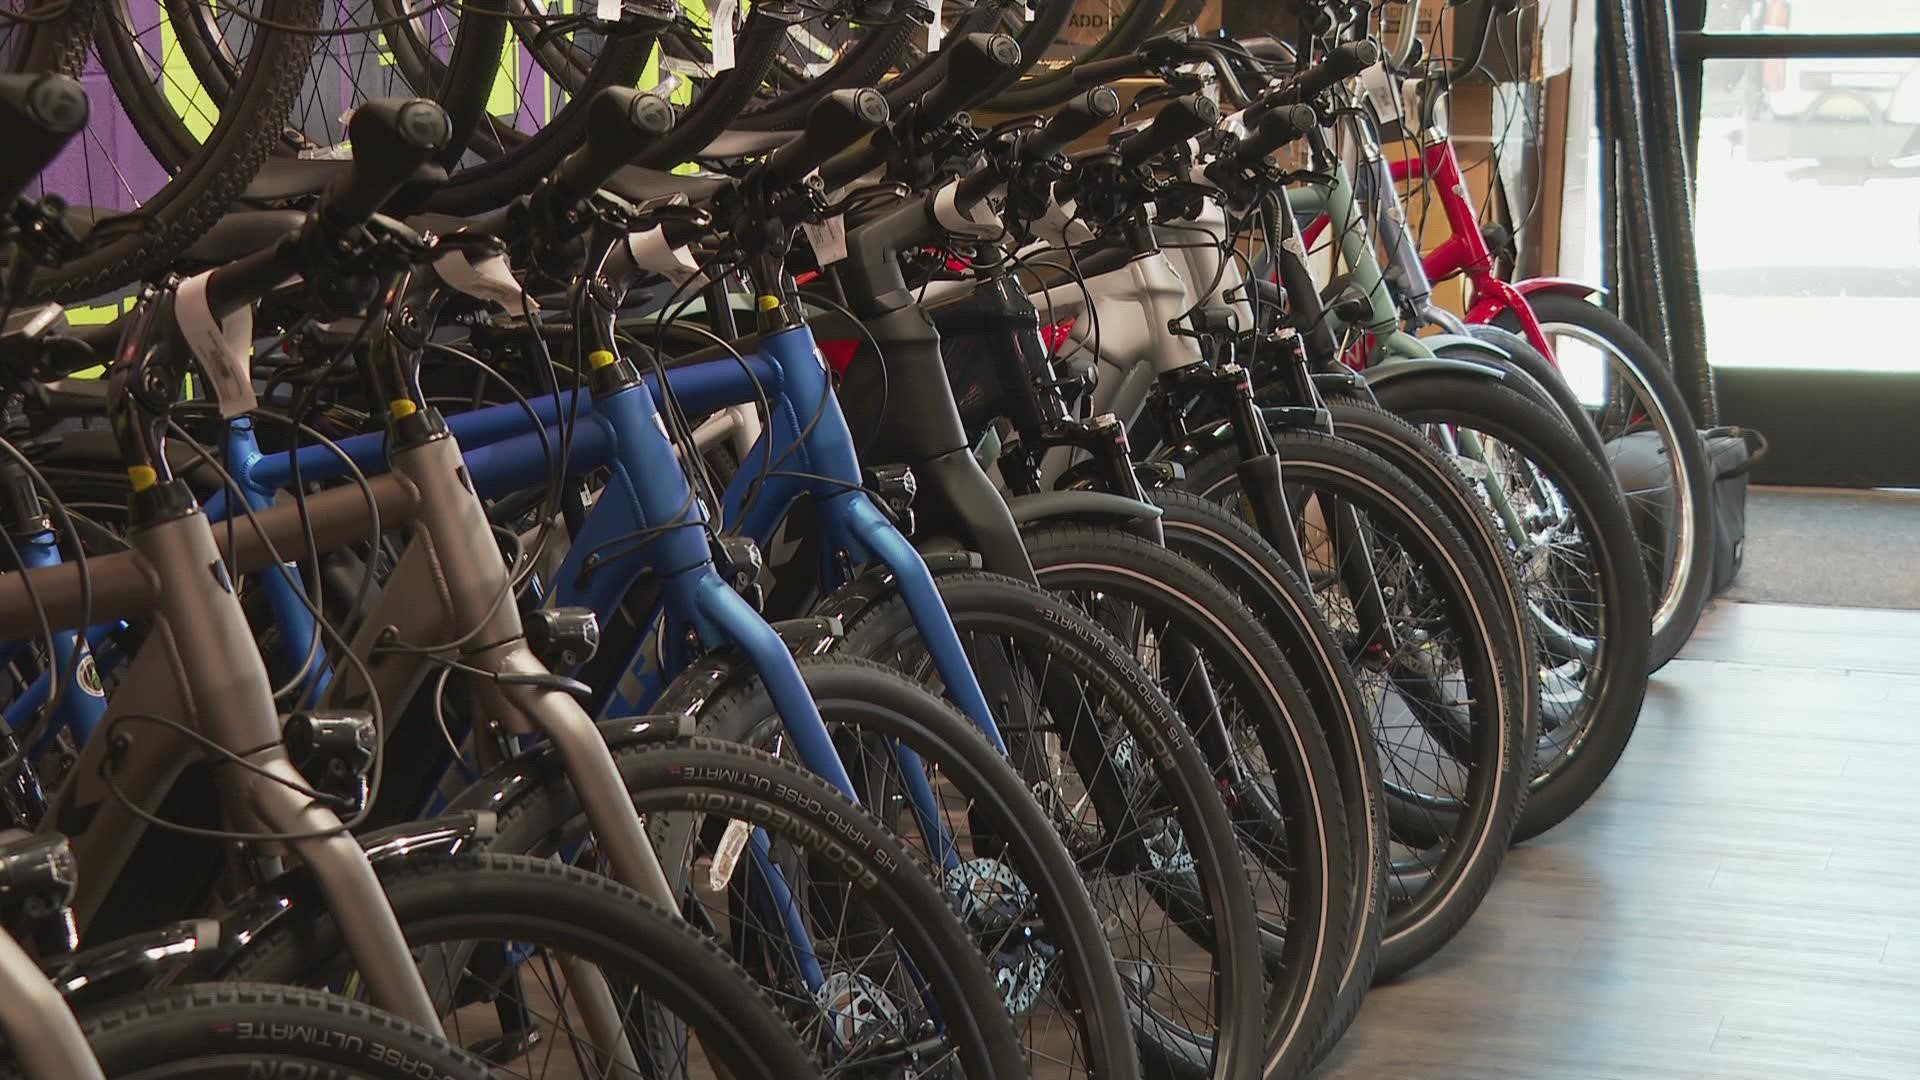 The city of Denver is giving people some incentive to buy E-bikes. 9news reporter Noel Brennan stopped a bike shop getting ready for the high demand.